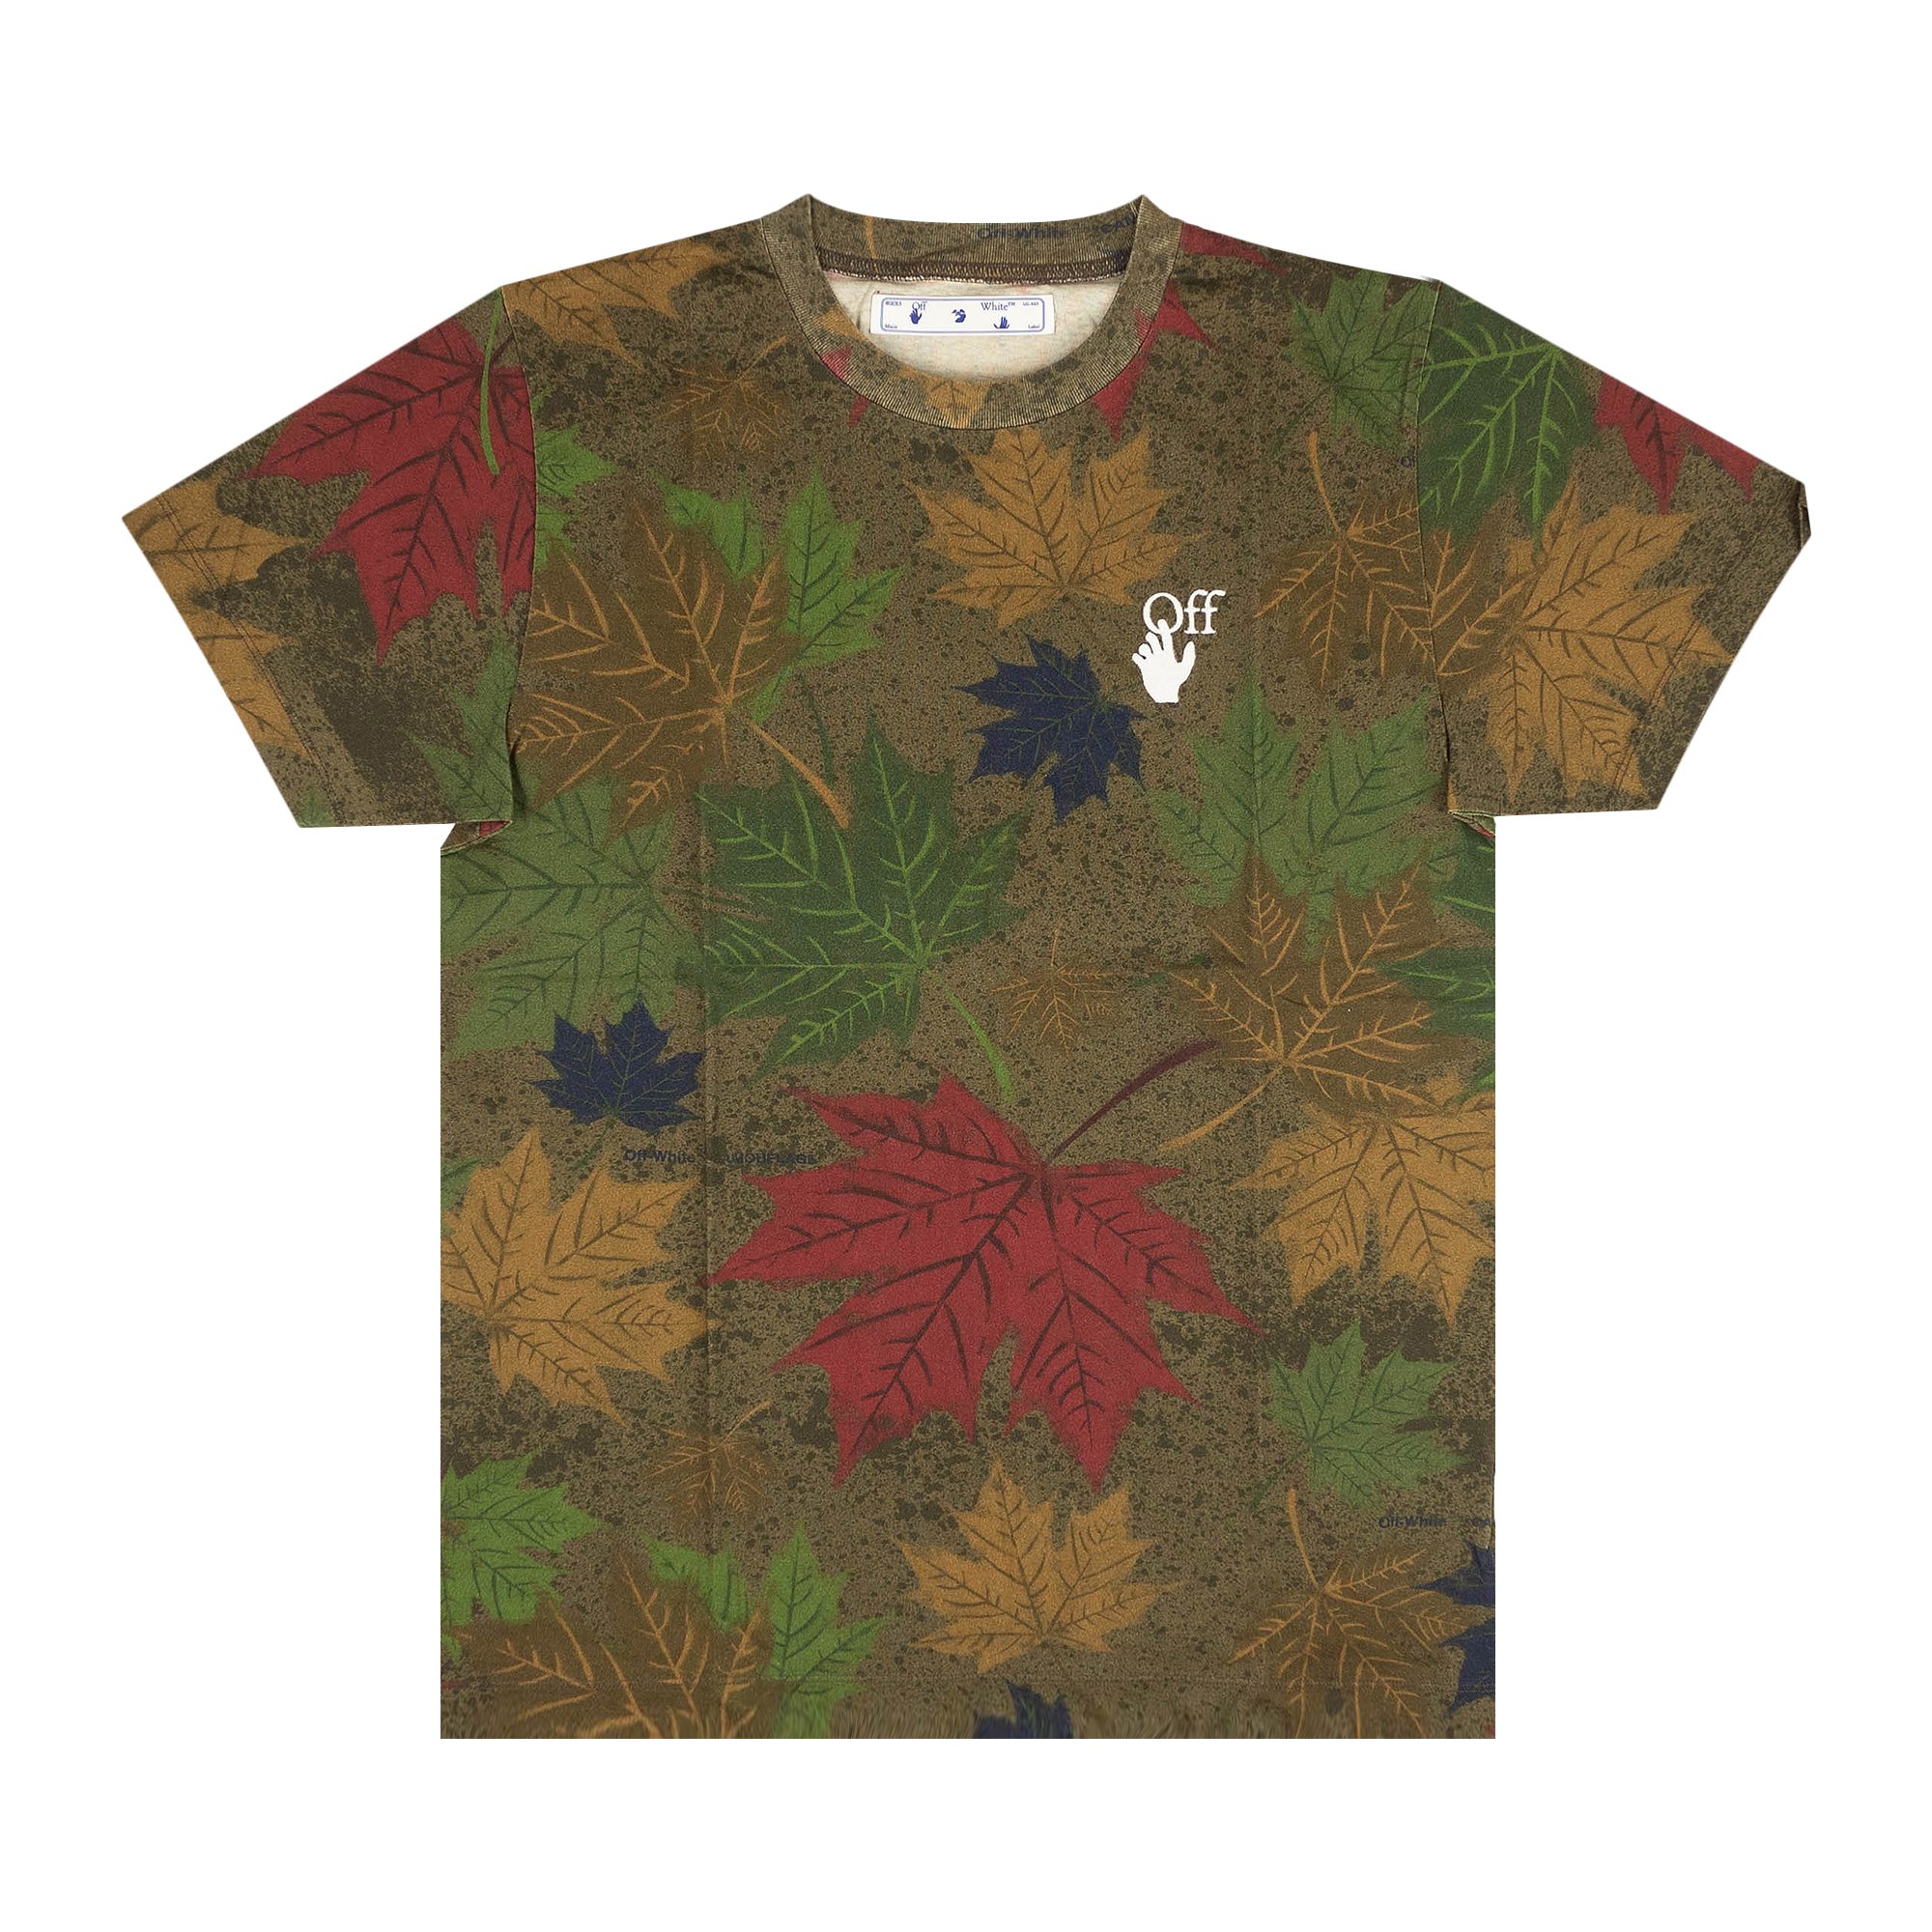 Buy Off-White Camo Arrow Leaves T-Shirt 'Green